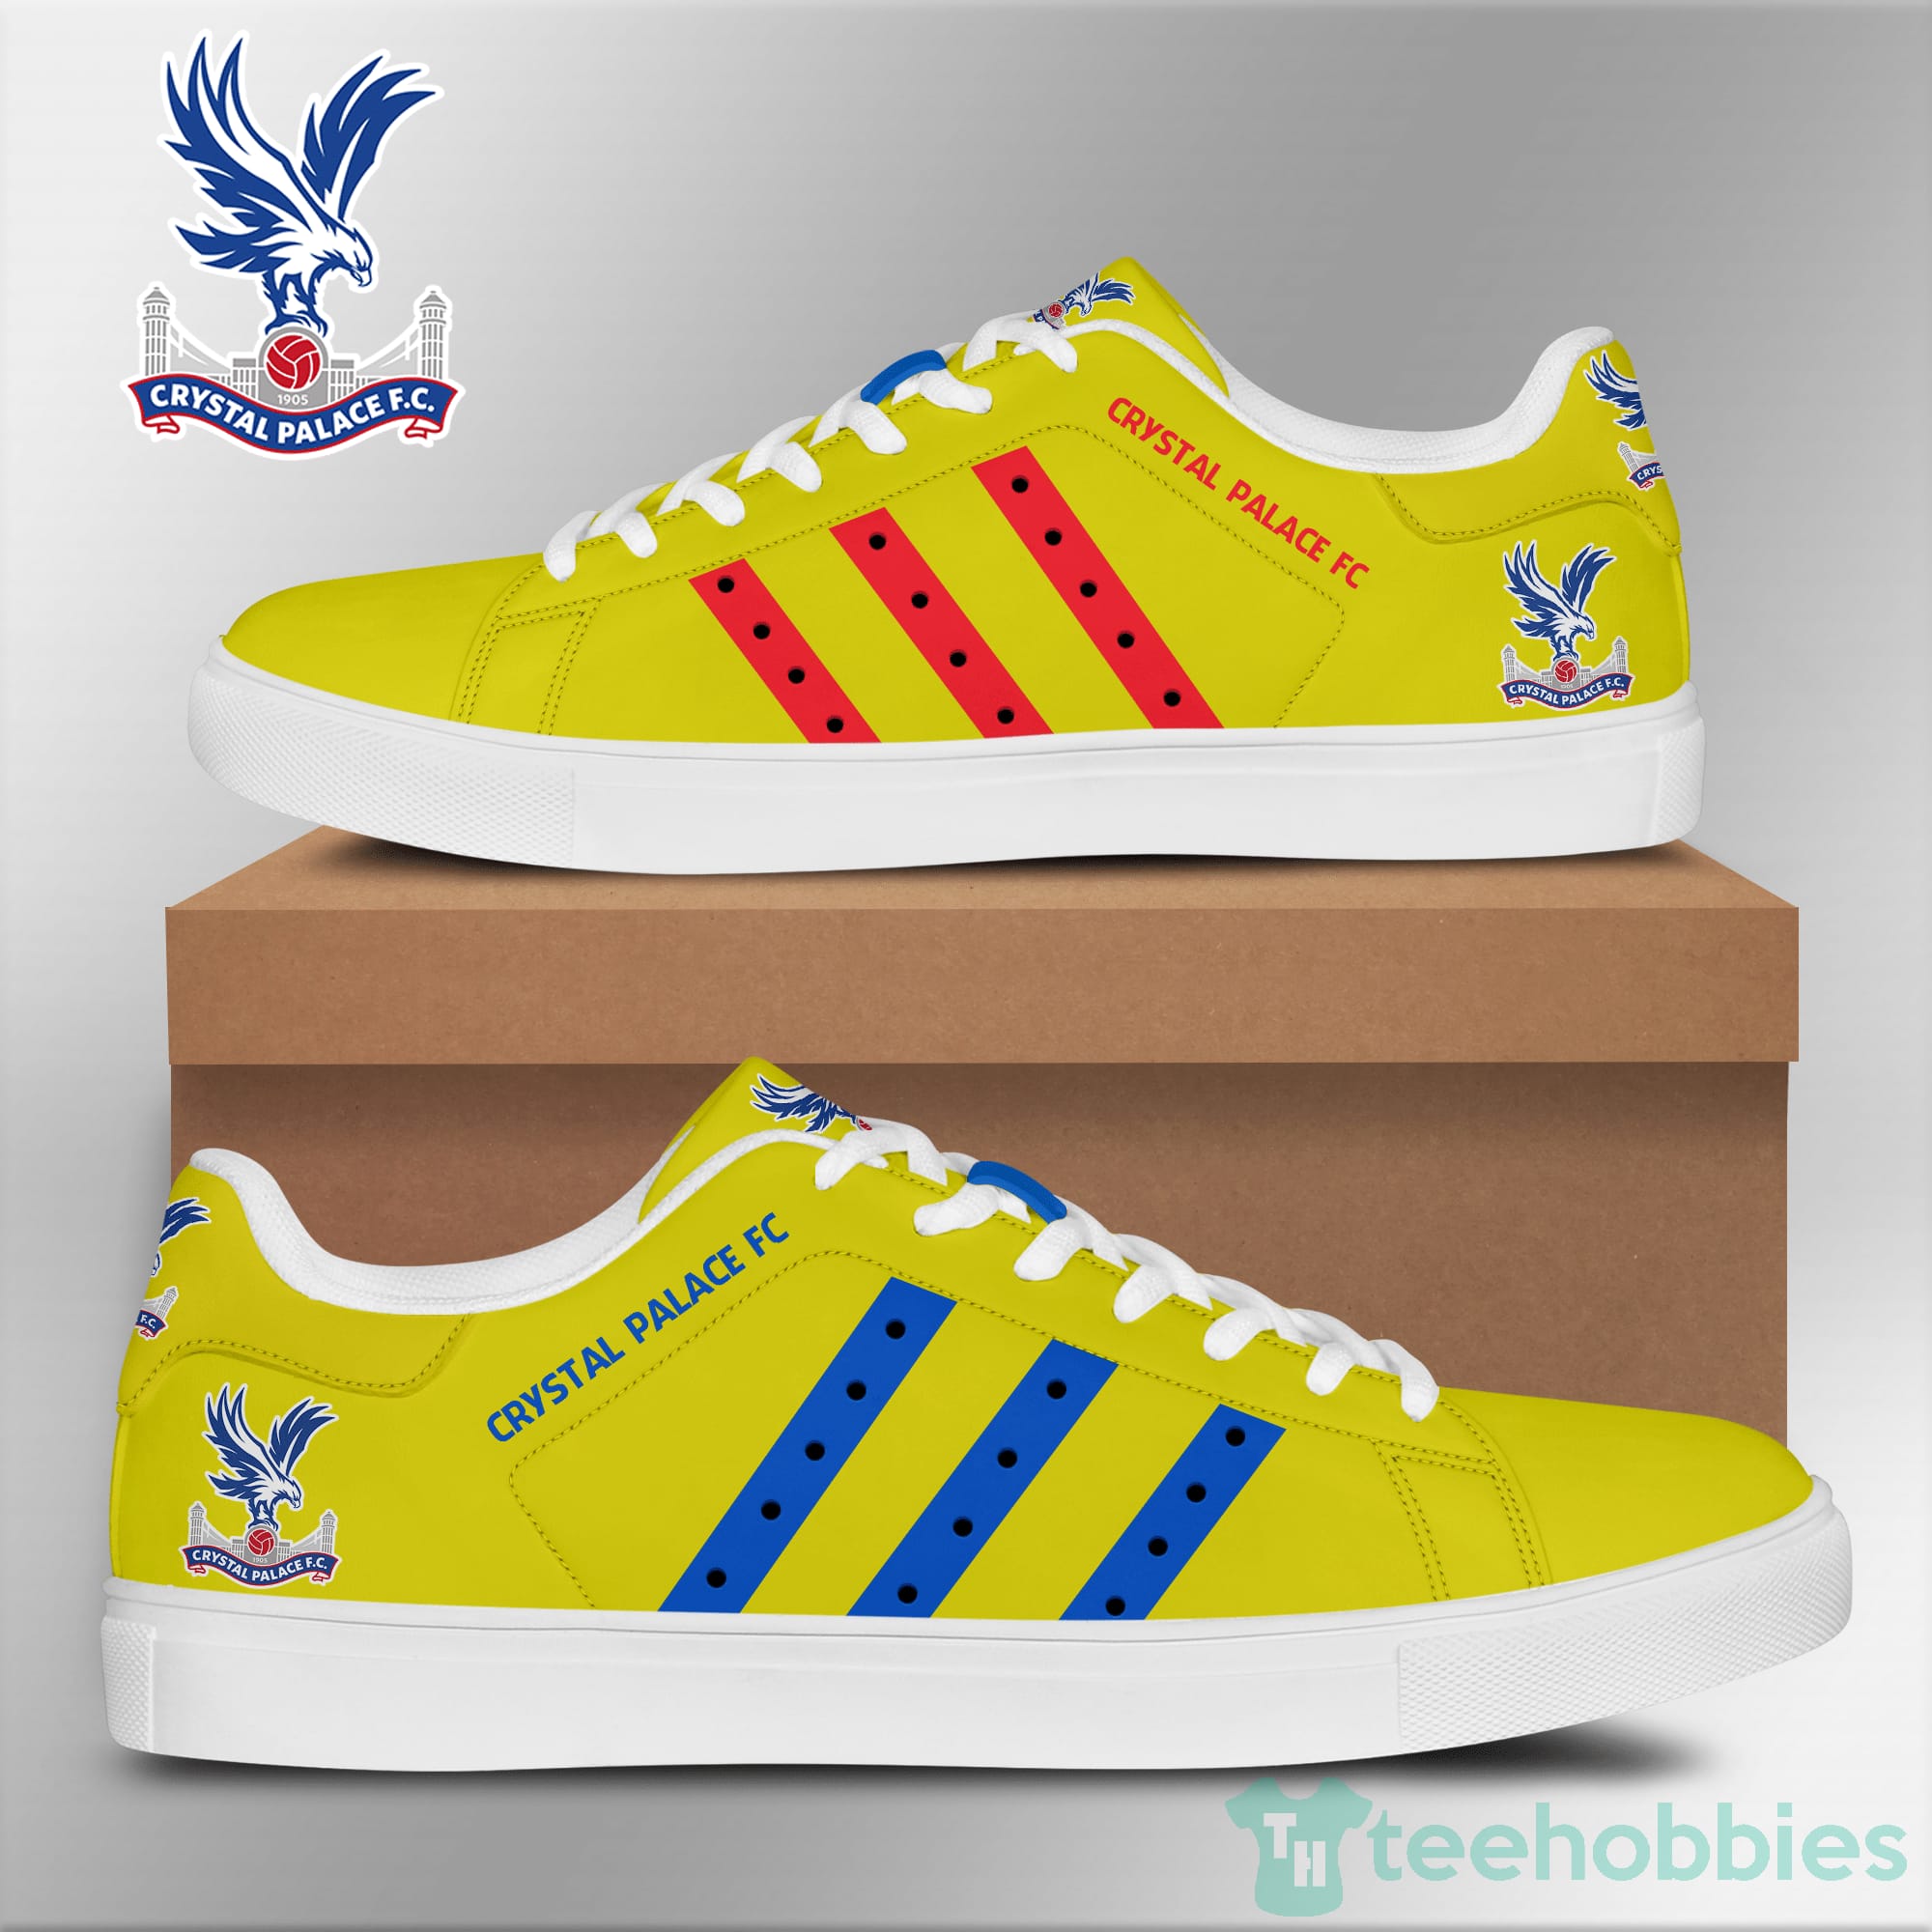 Crystal Palace Fc Yellow  Low Top Skate Shoes Product photo 1